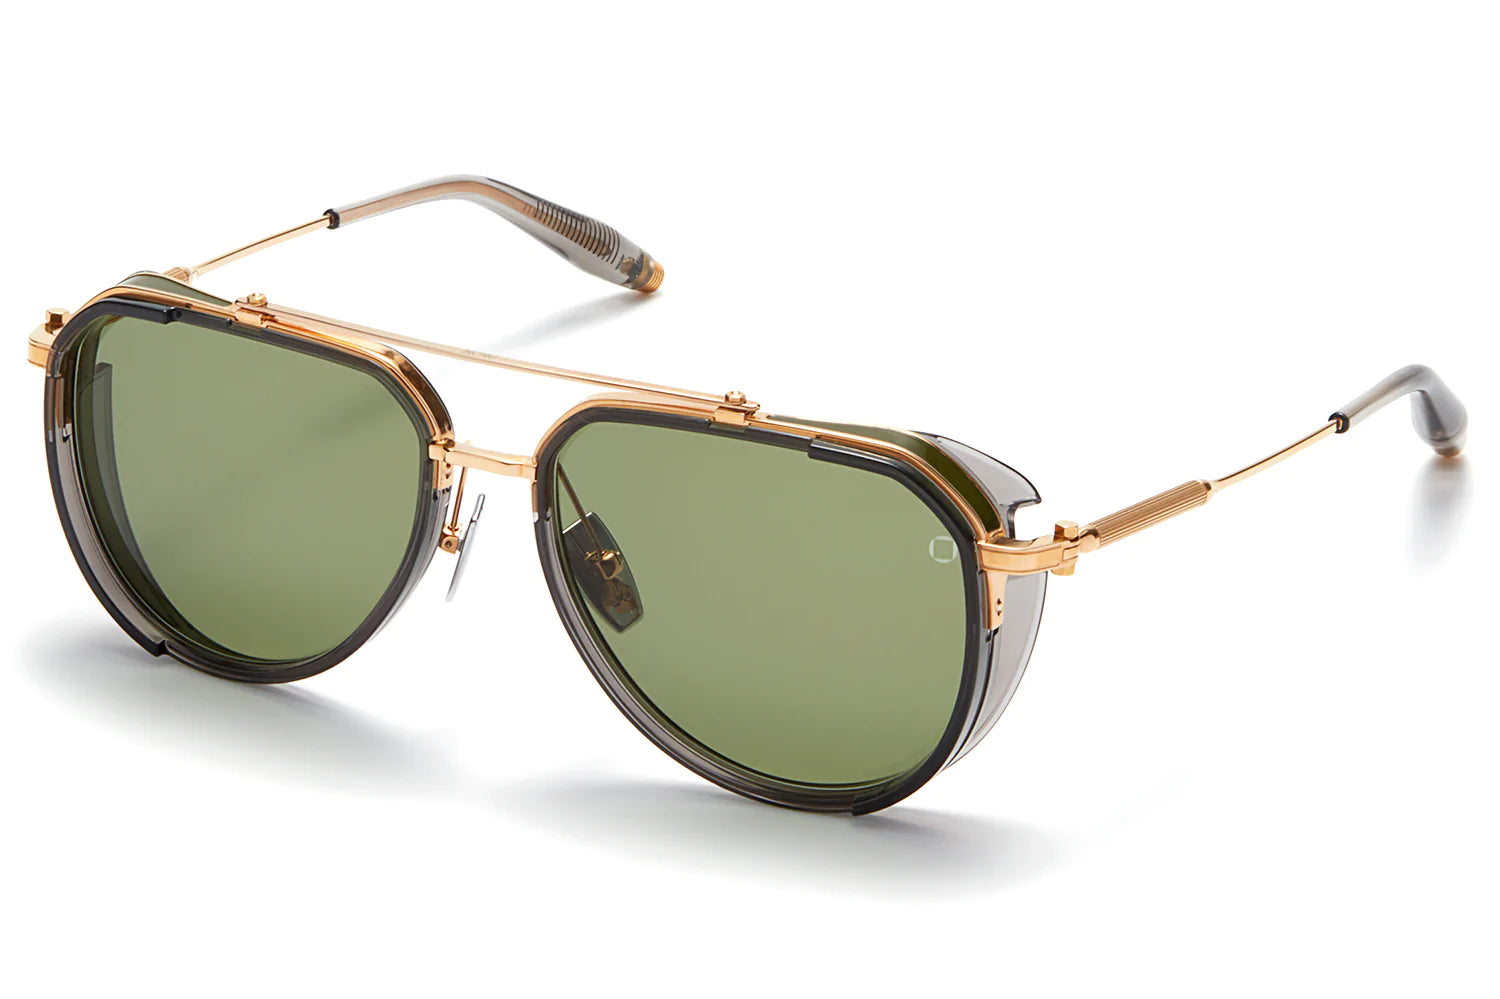 Three-quarter view of Akoni's "Echo" frame, a classic aviator shape with a unique frontal hood and black enamel accents around the edge of the trim.